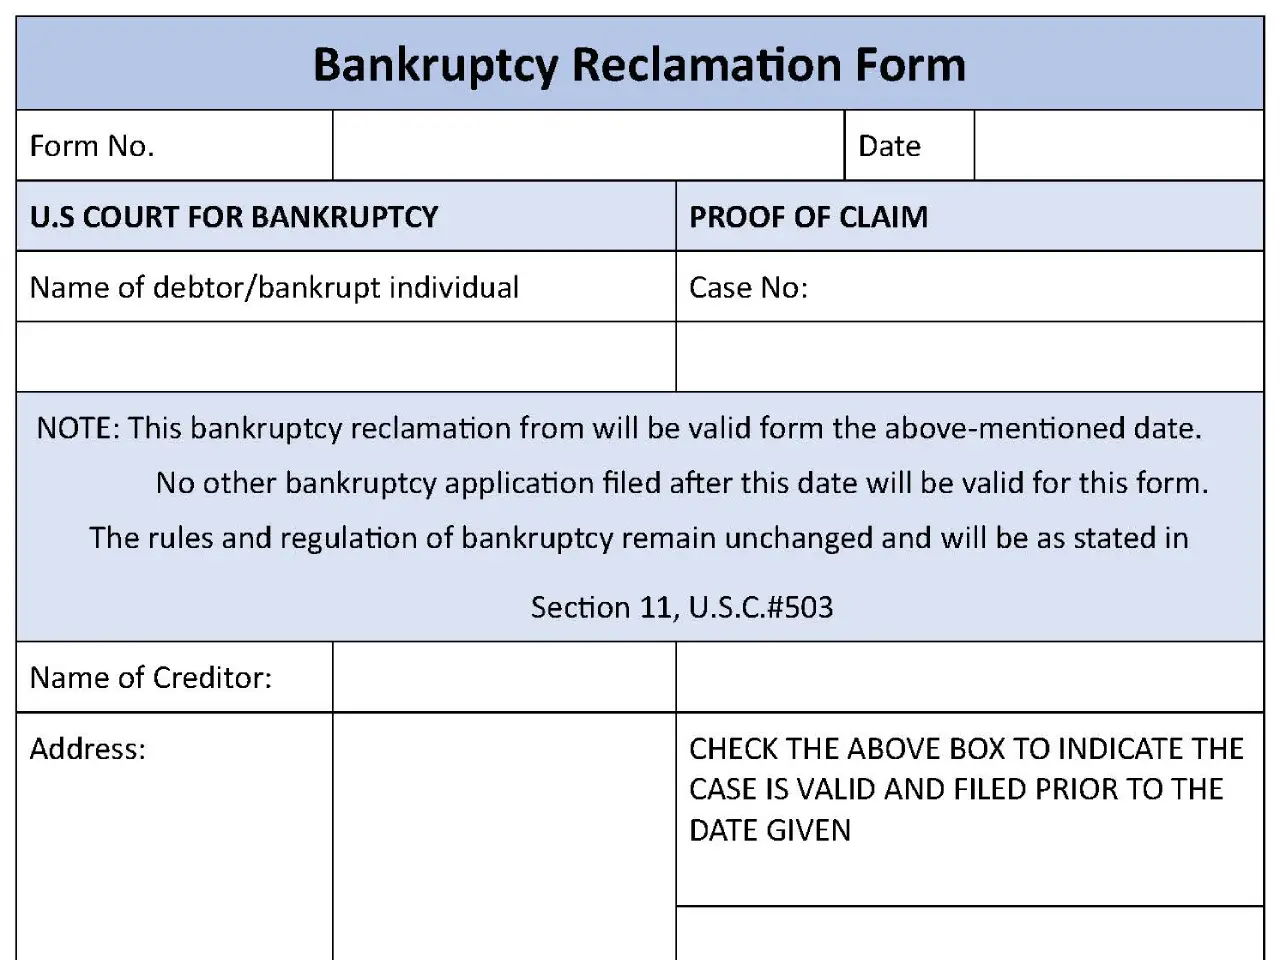 Bankruptcy Reclamation Fillable PDF Form